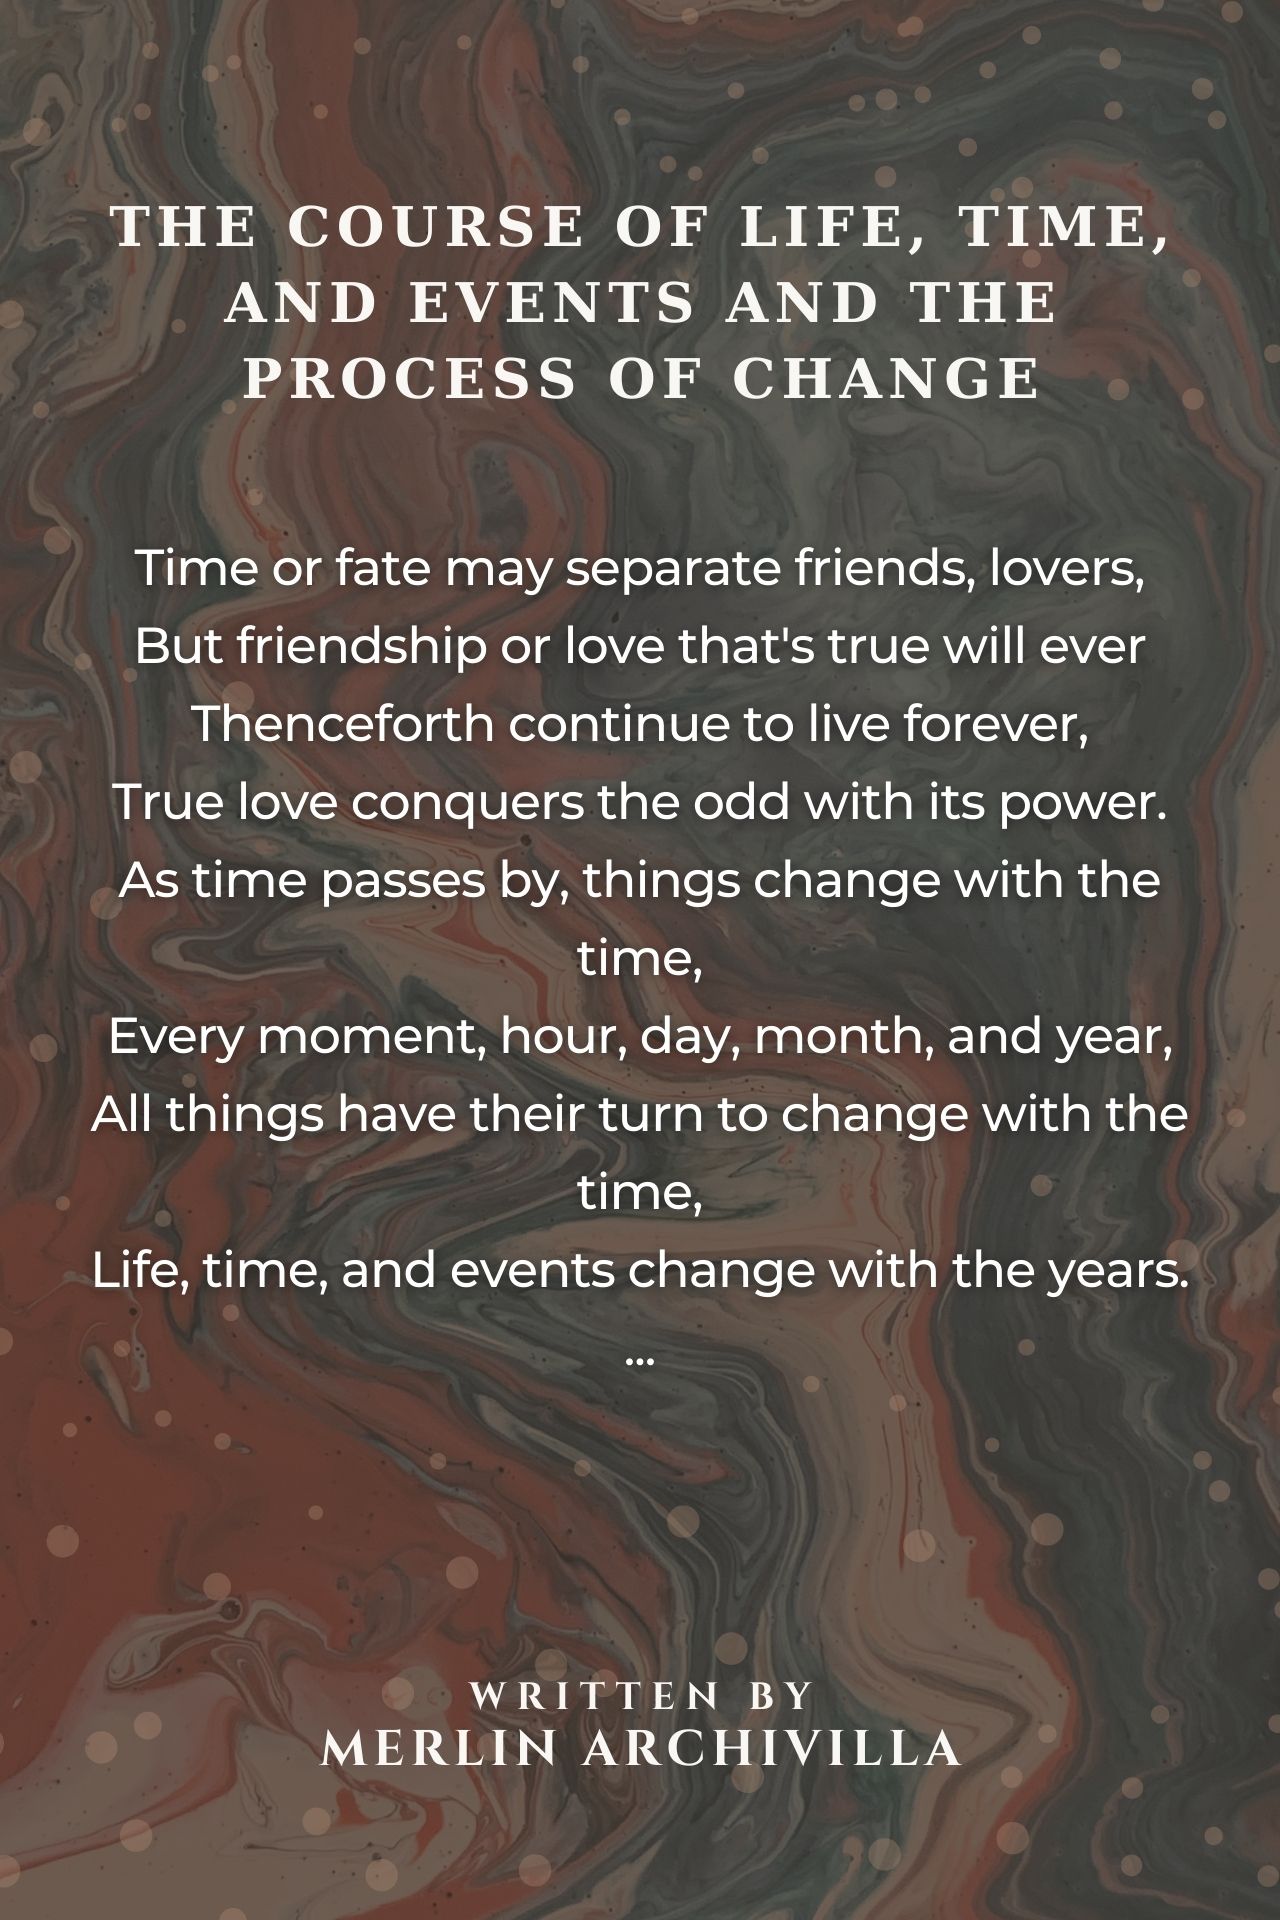 The Course Of Life, Time, And Events And The Process Of Change